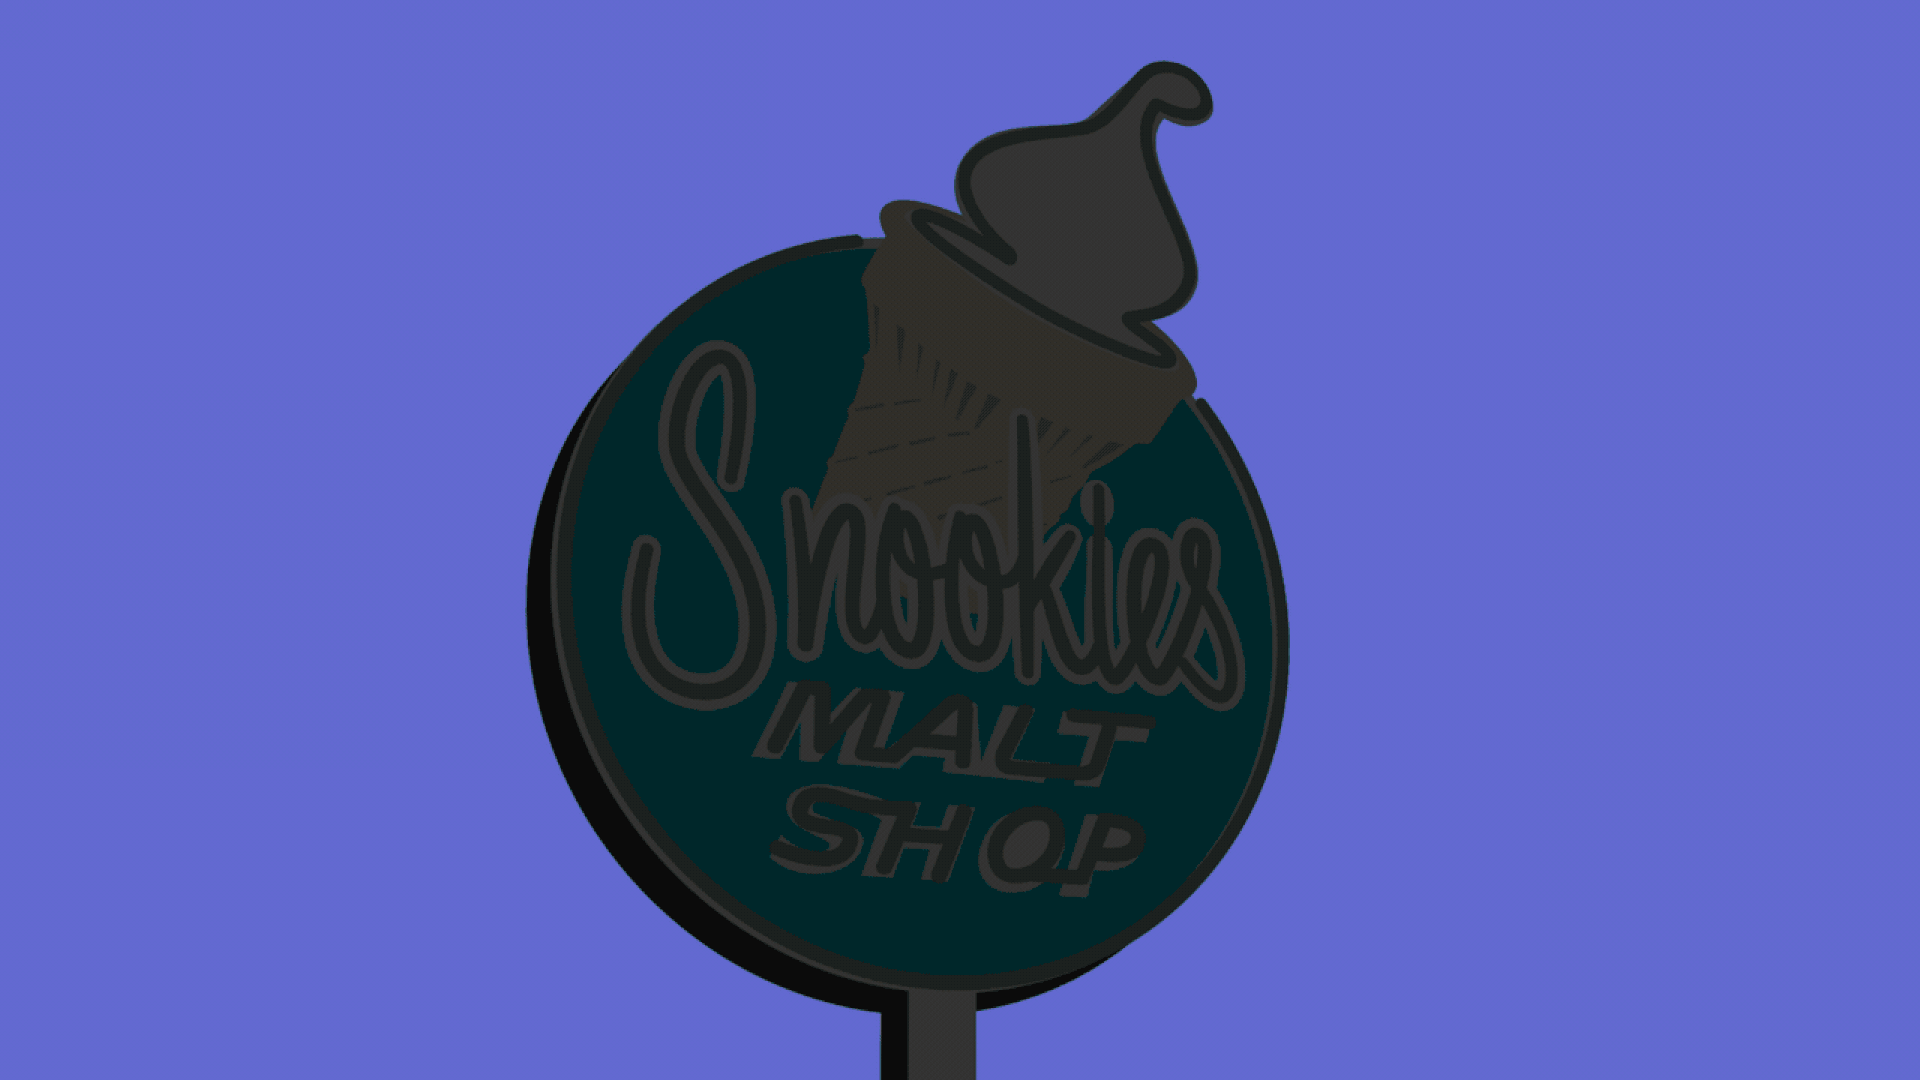 Illustration of the Snookie's sign in Des Moines.